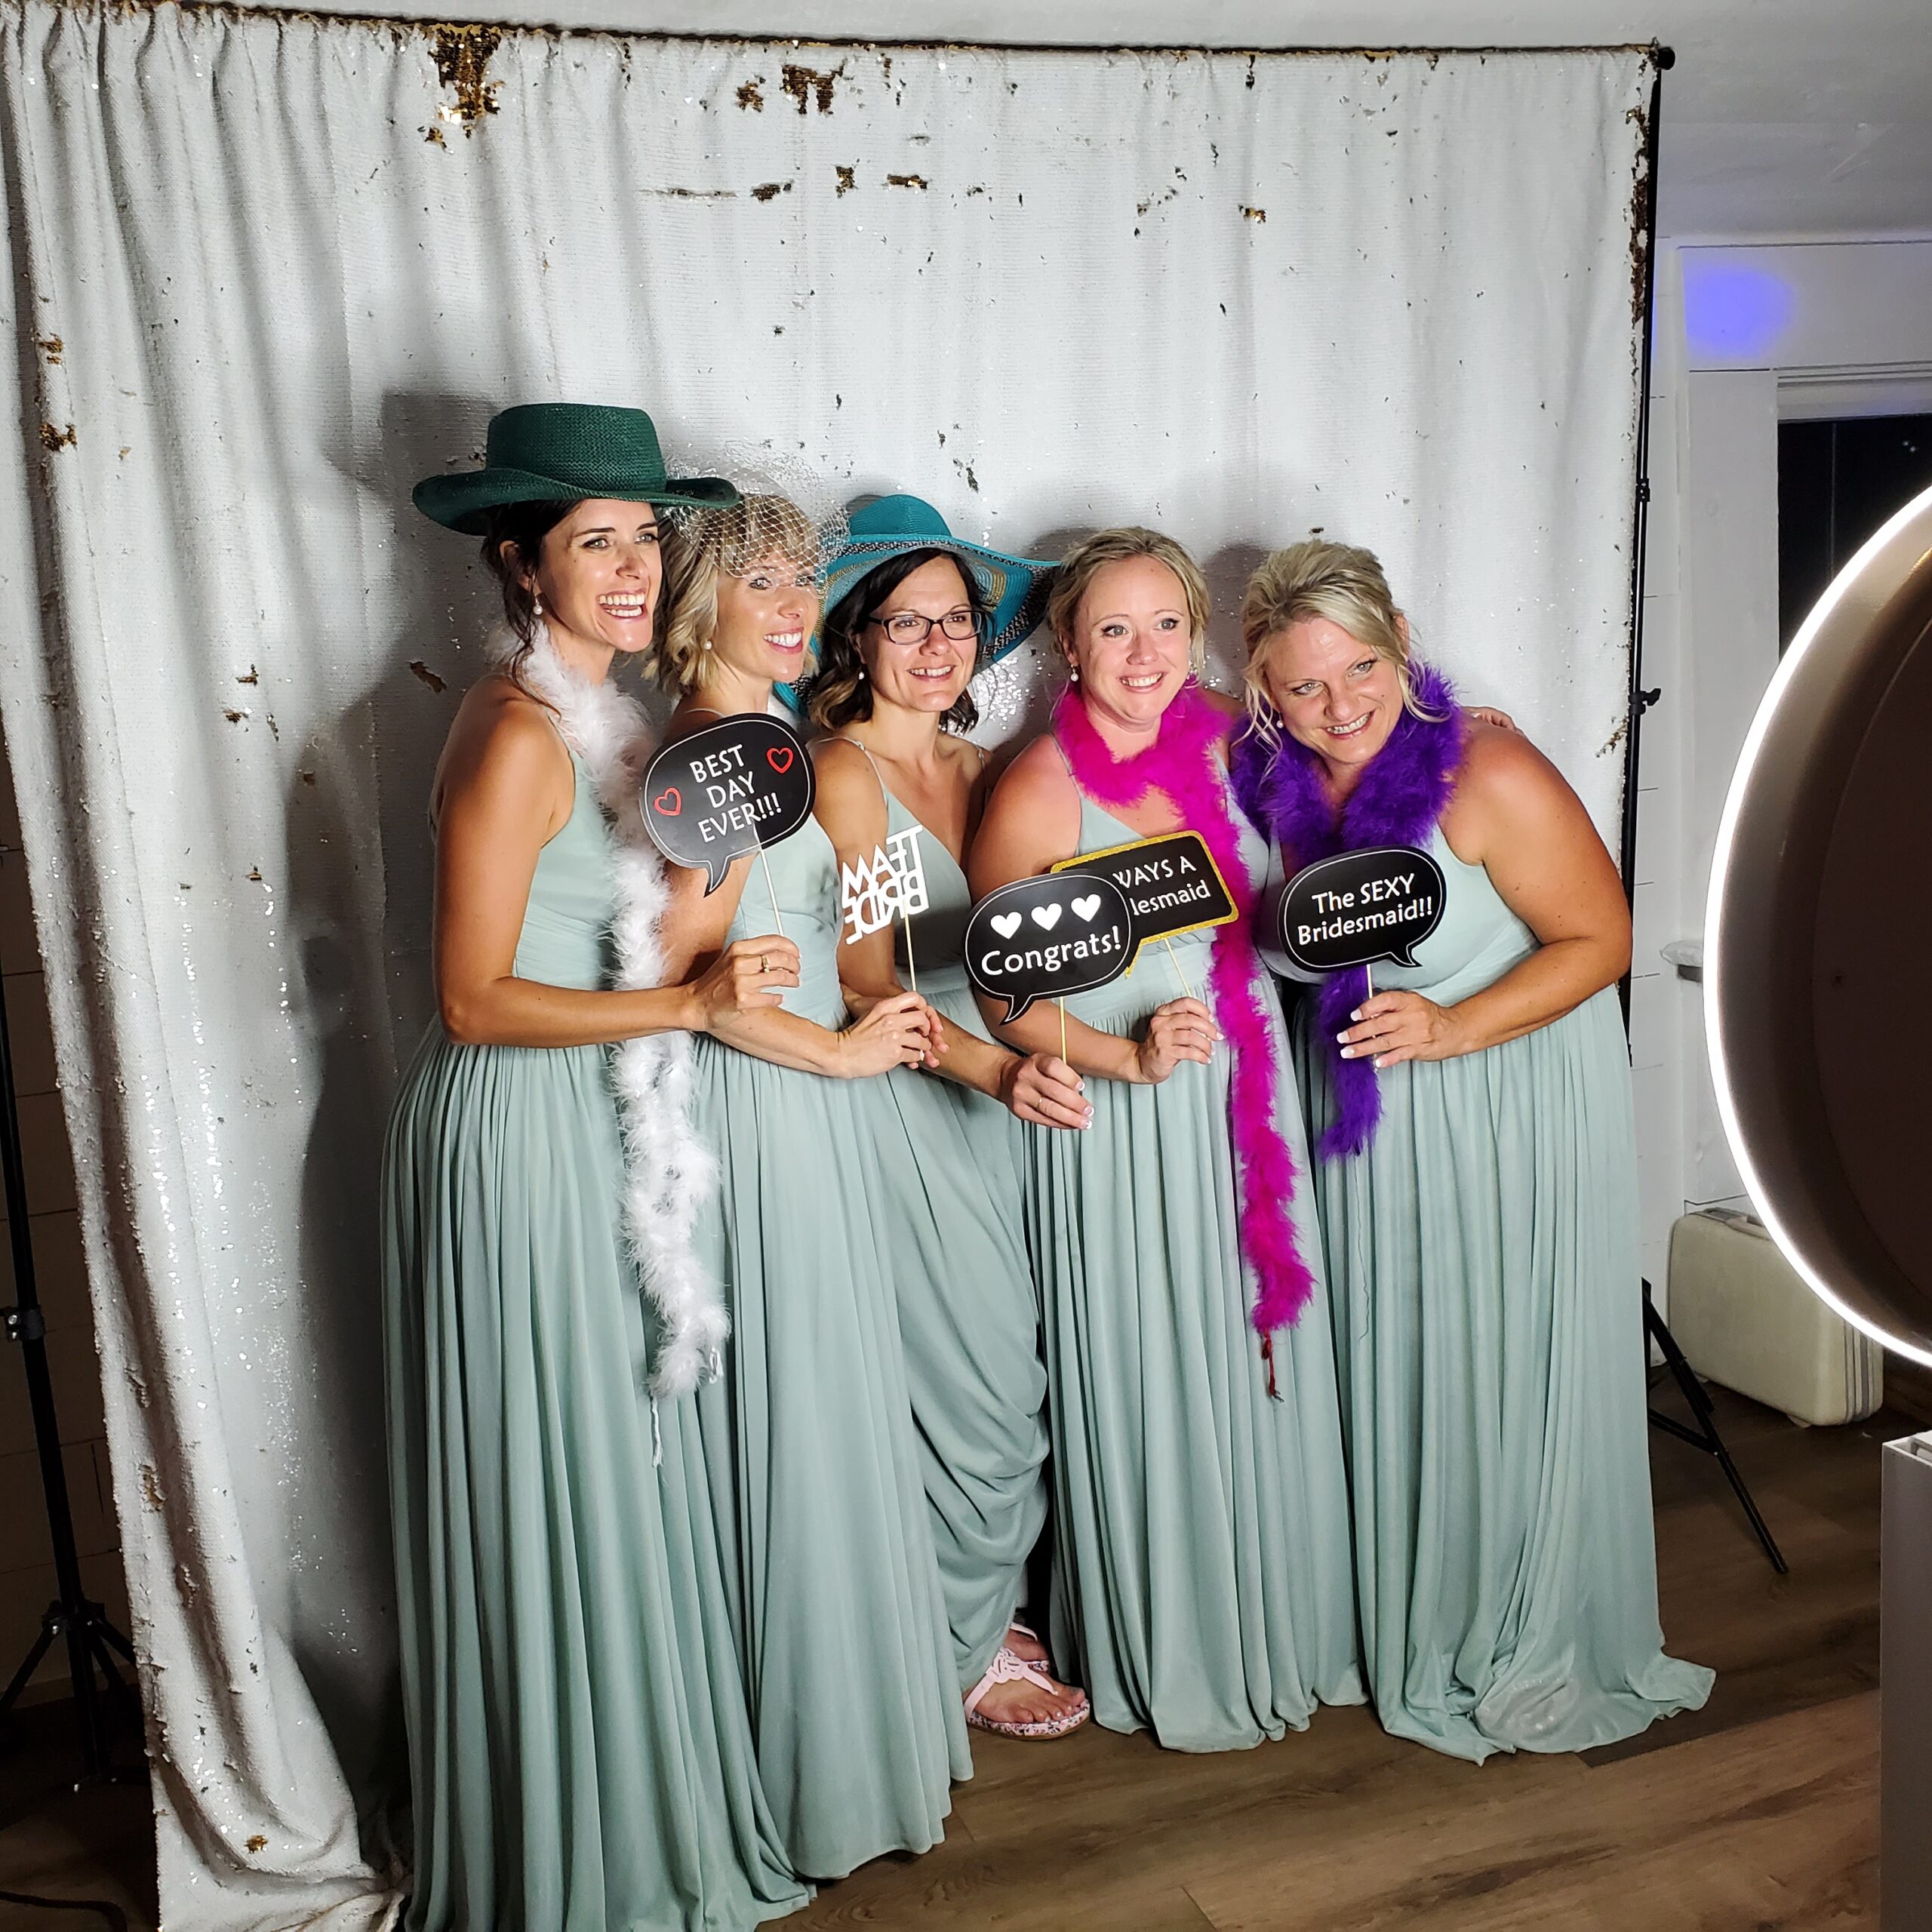 The Bridesmaids at the photo booth